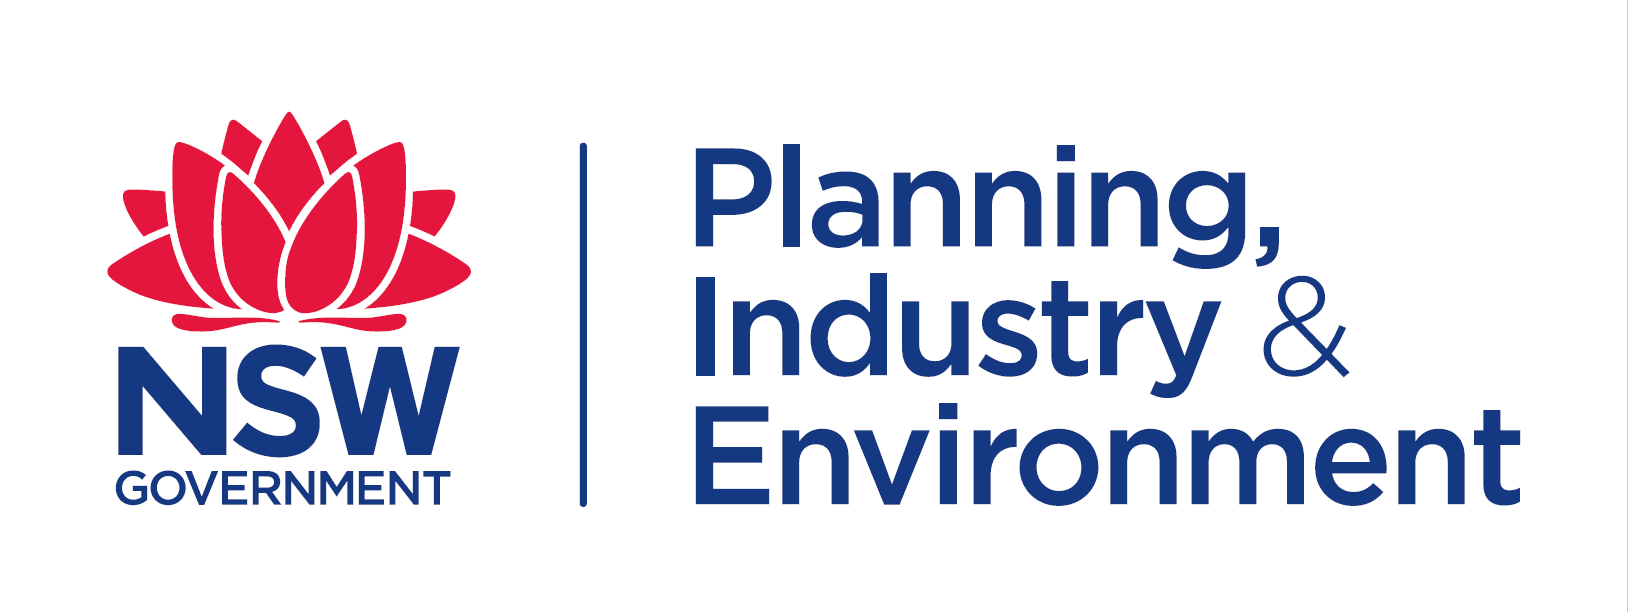 Planning Industry & Environment